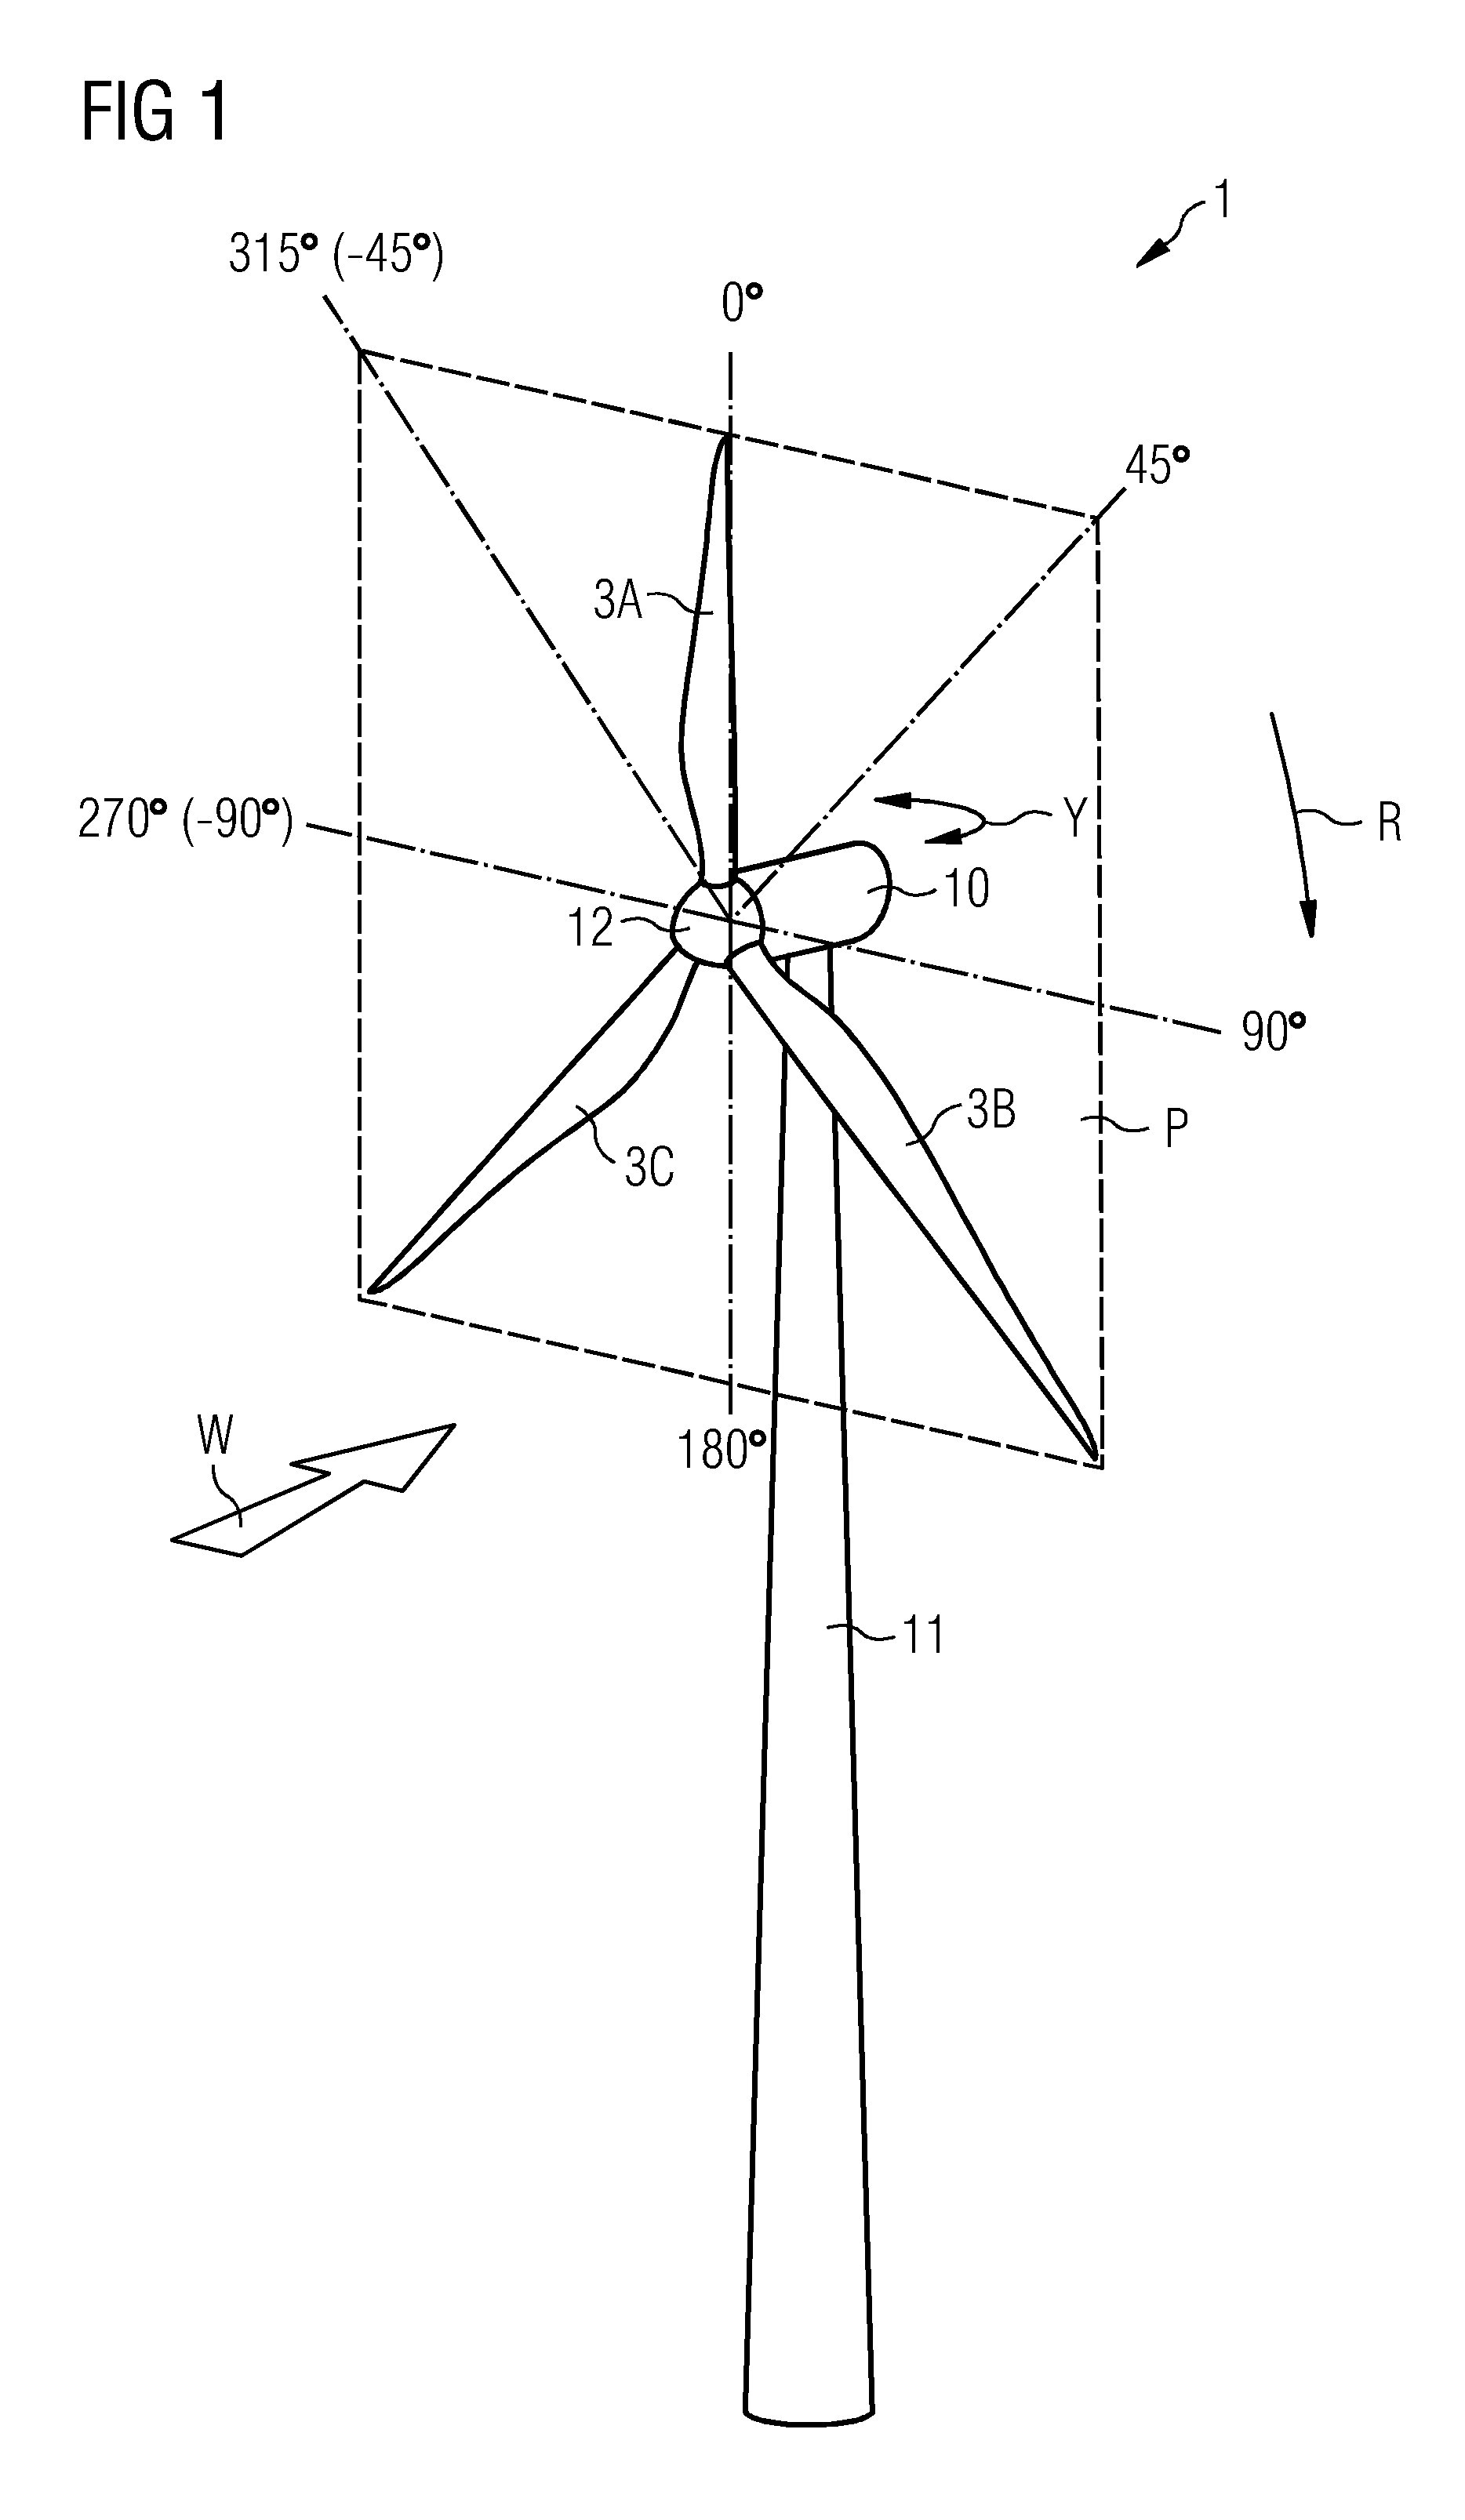 Method of controlling pitch systems of a wind turbine